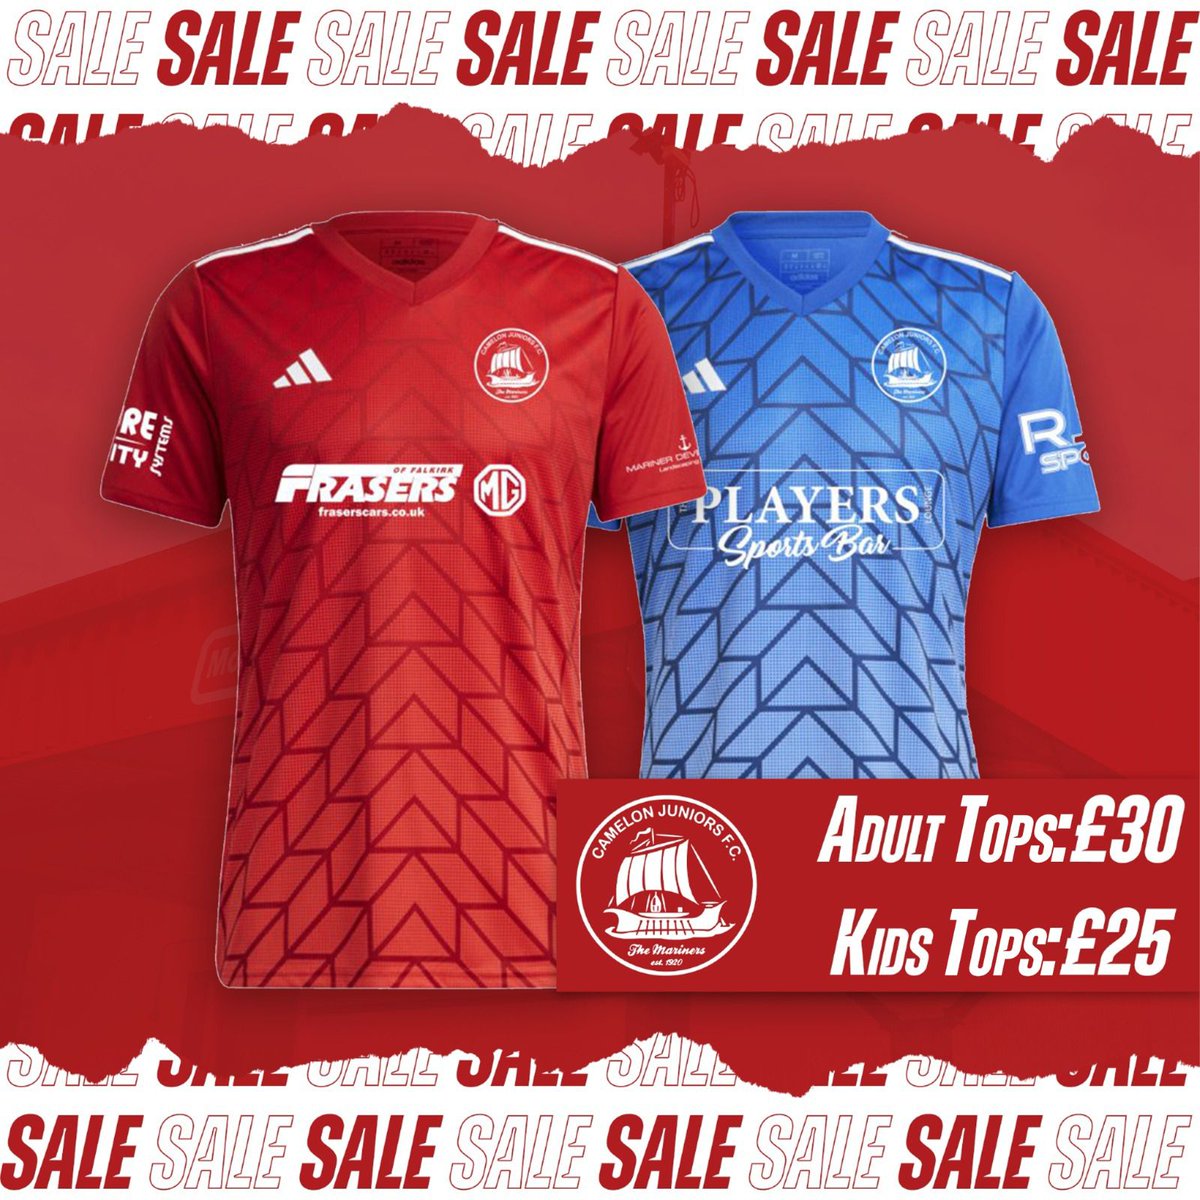 🚨 SALE!!! We have a sale now on for the last few remaining home and away tops from this season. These are great tops to have in anyone's collection! You can purchase your tops on our website today. 🖥 Buy online here: camelonjuniors.co.uk/product-catego…